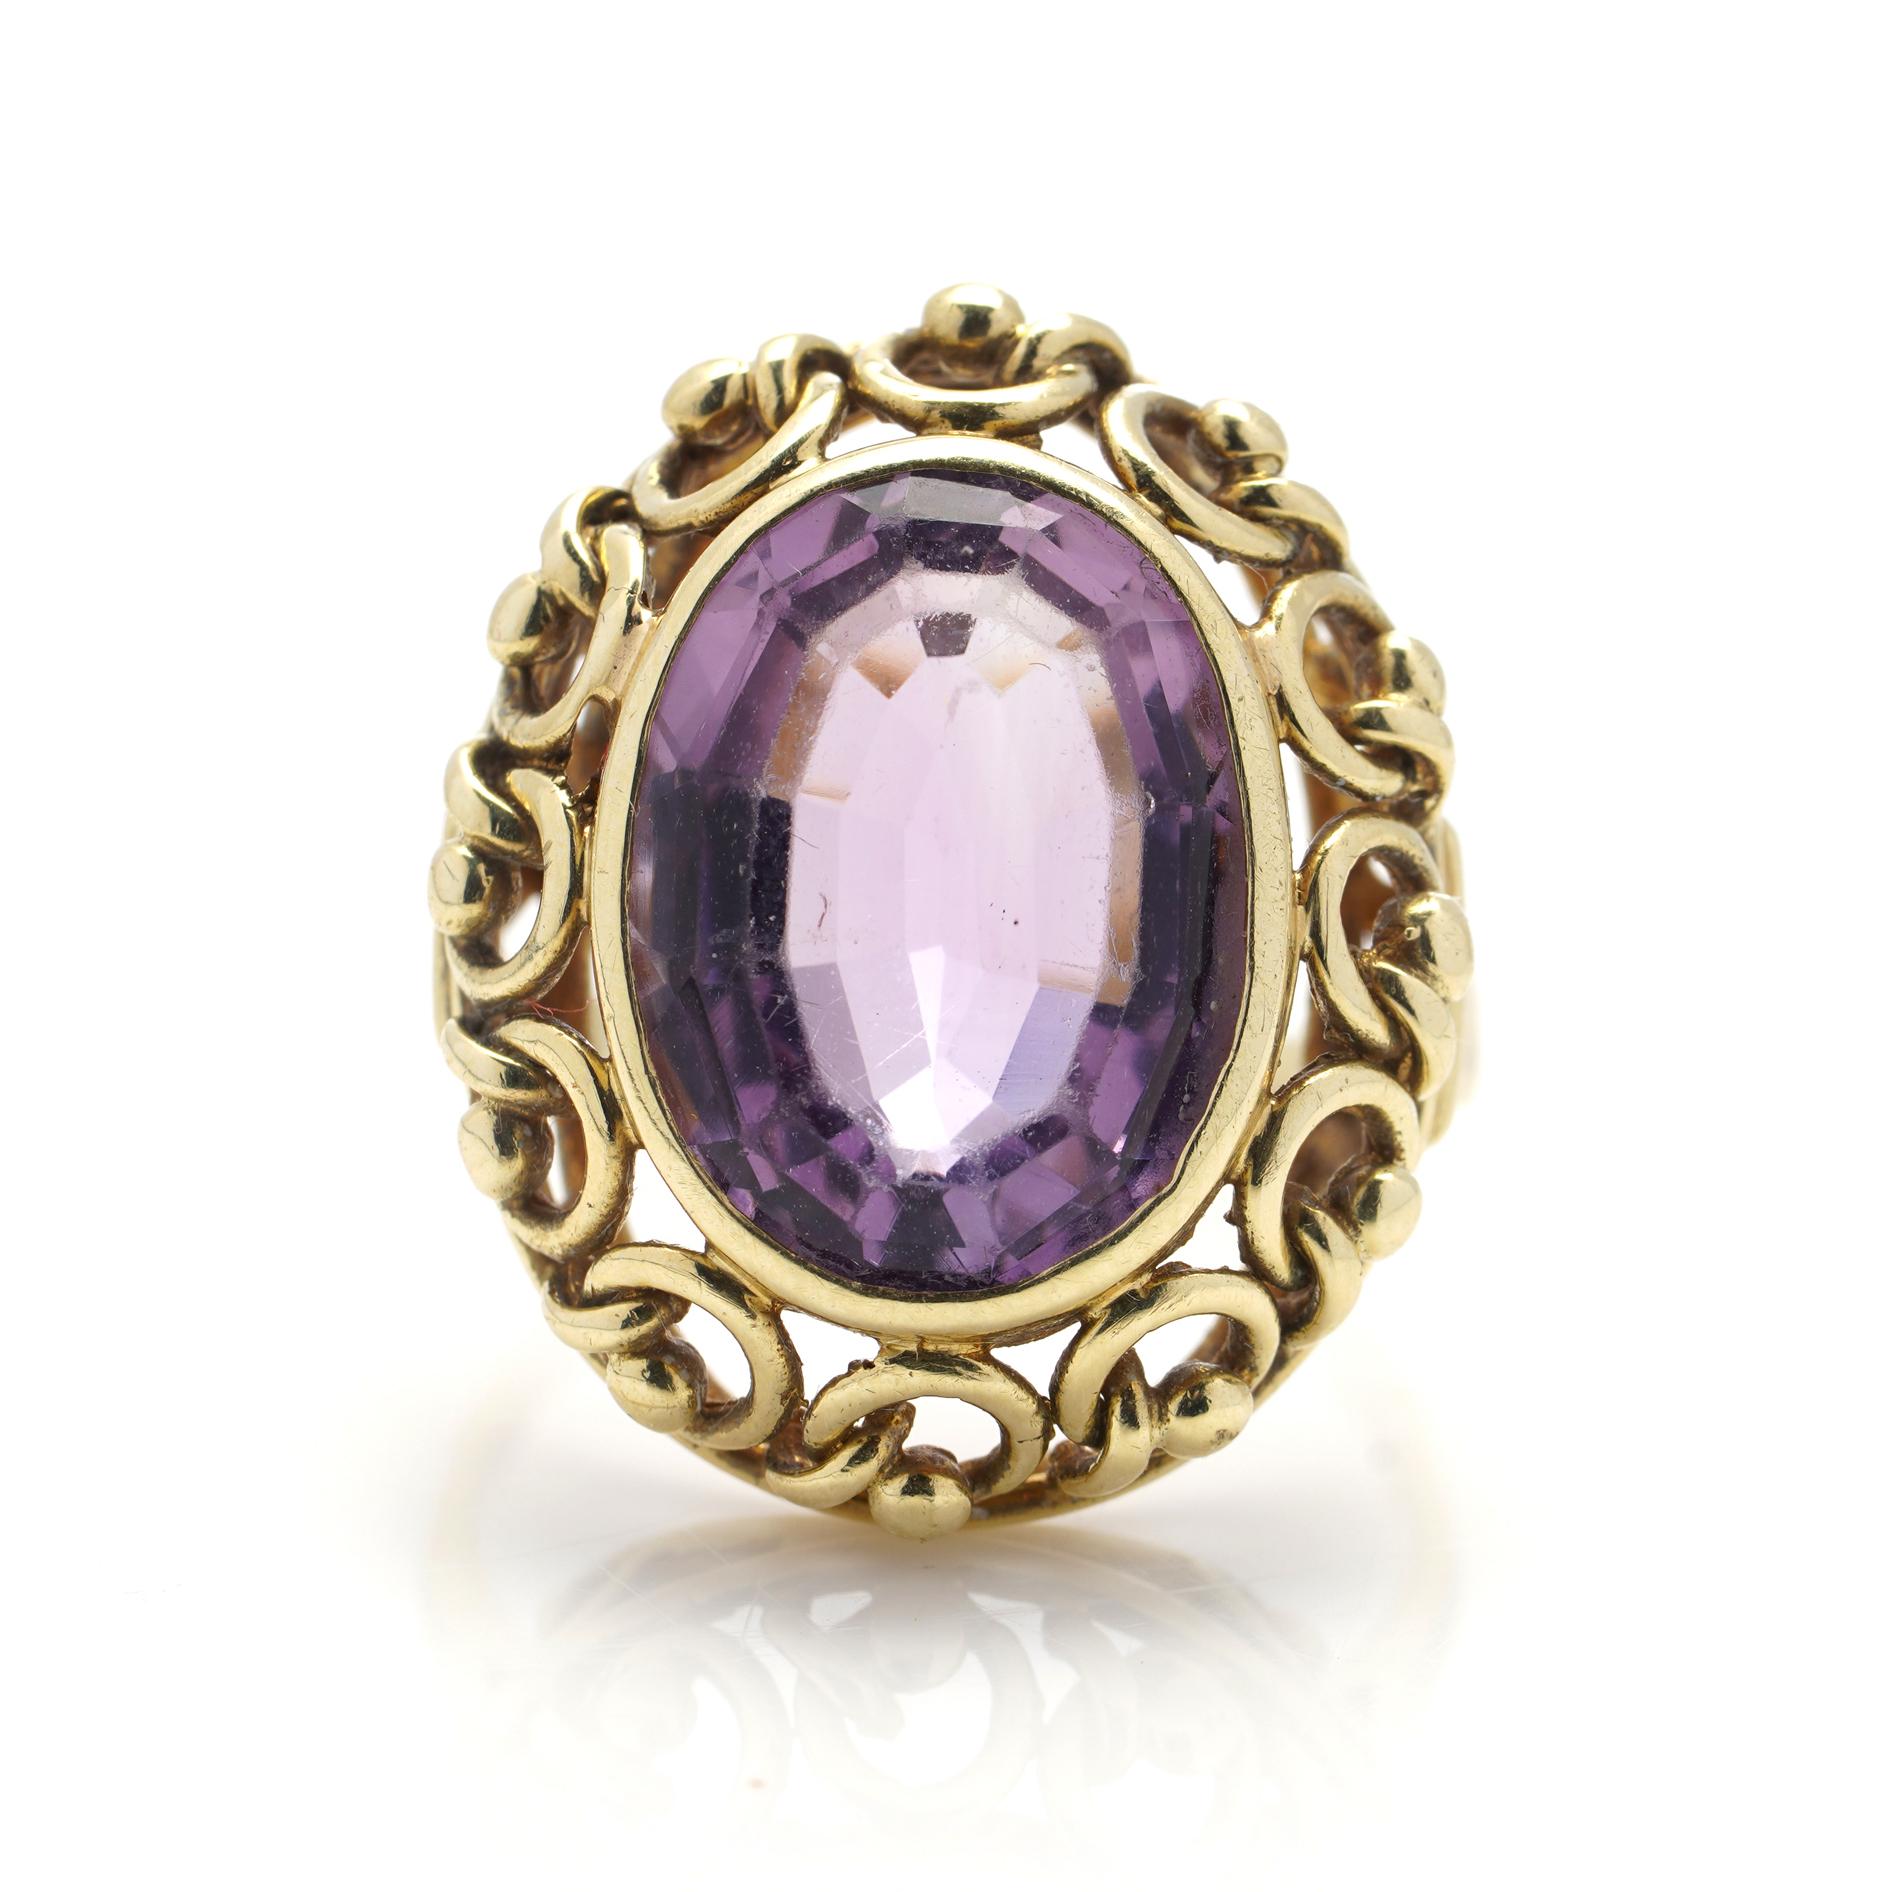 Vintage 14 Karat Yellow Gold 6.30 Carats Amethyst Ladies Ring In Good Condition For Sale In Braintree, GB